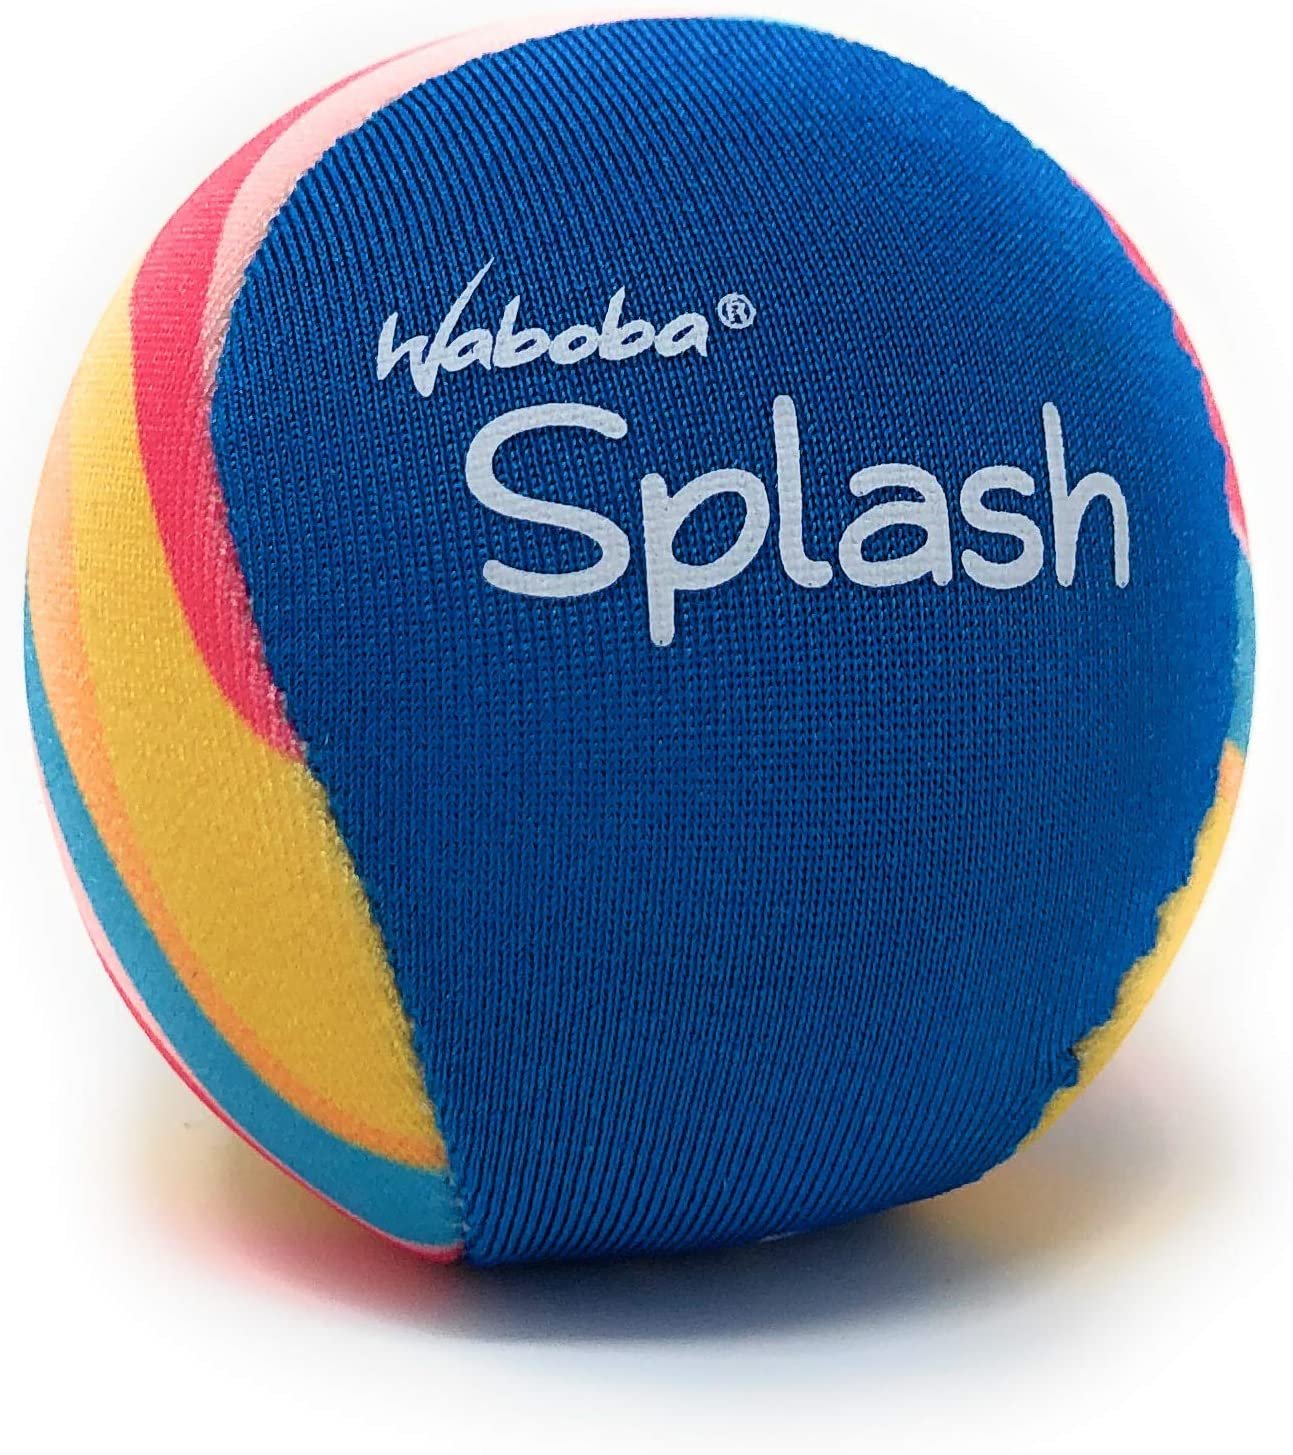 Waboba Splash Water Bouncing Ball (Colors May Vary) (Double Pack)